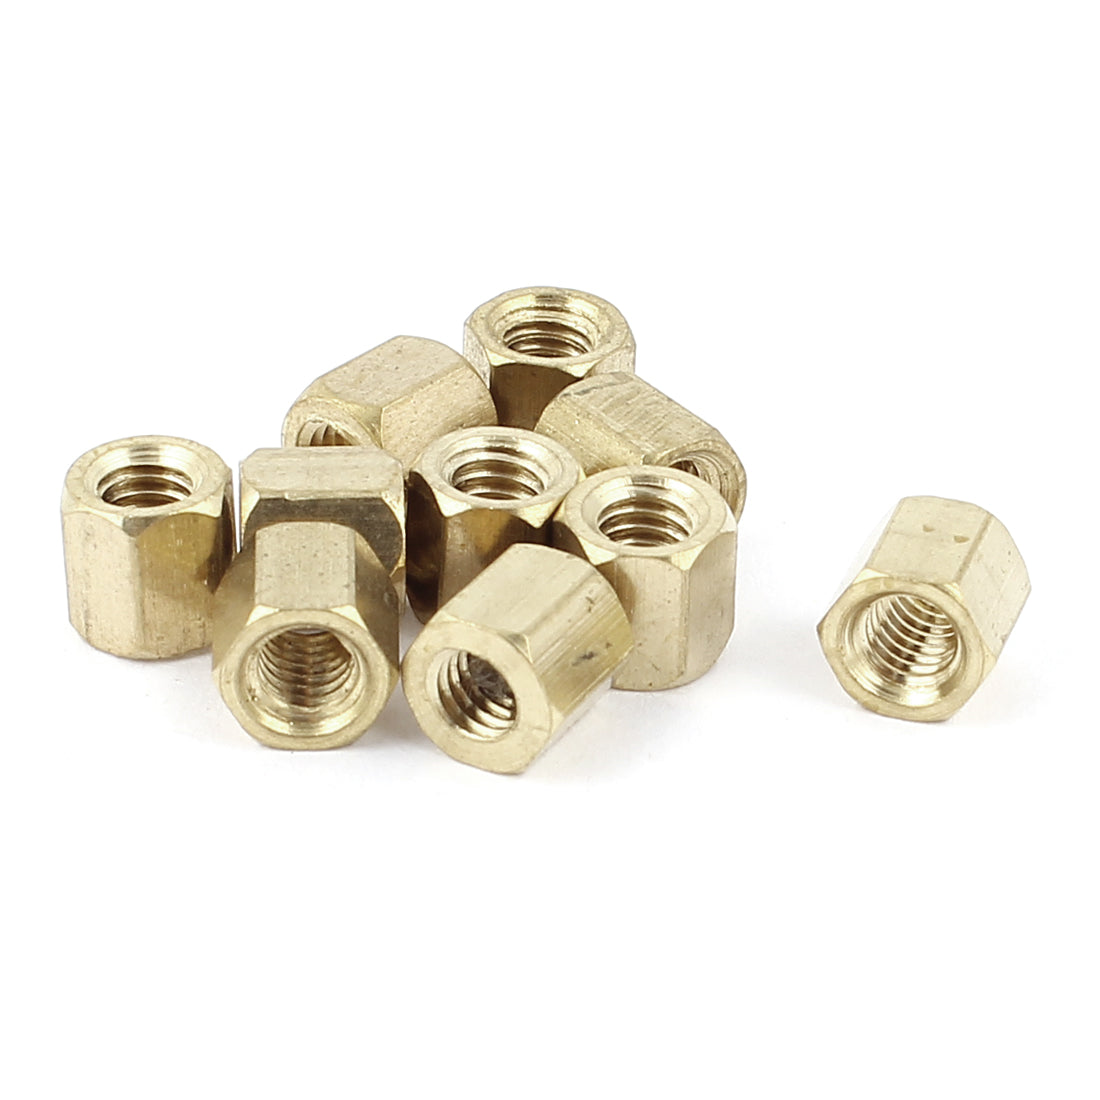 uxcell Uxcell M4 x 6mm Female/Female Thread Brass Hex Standoff PCB Pillar Spacer 10pcs